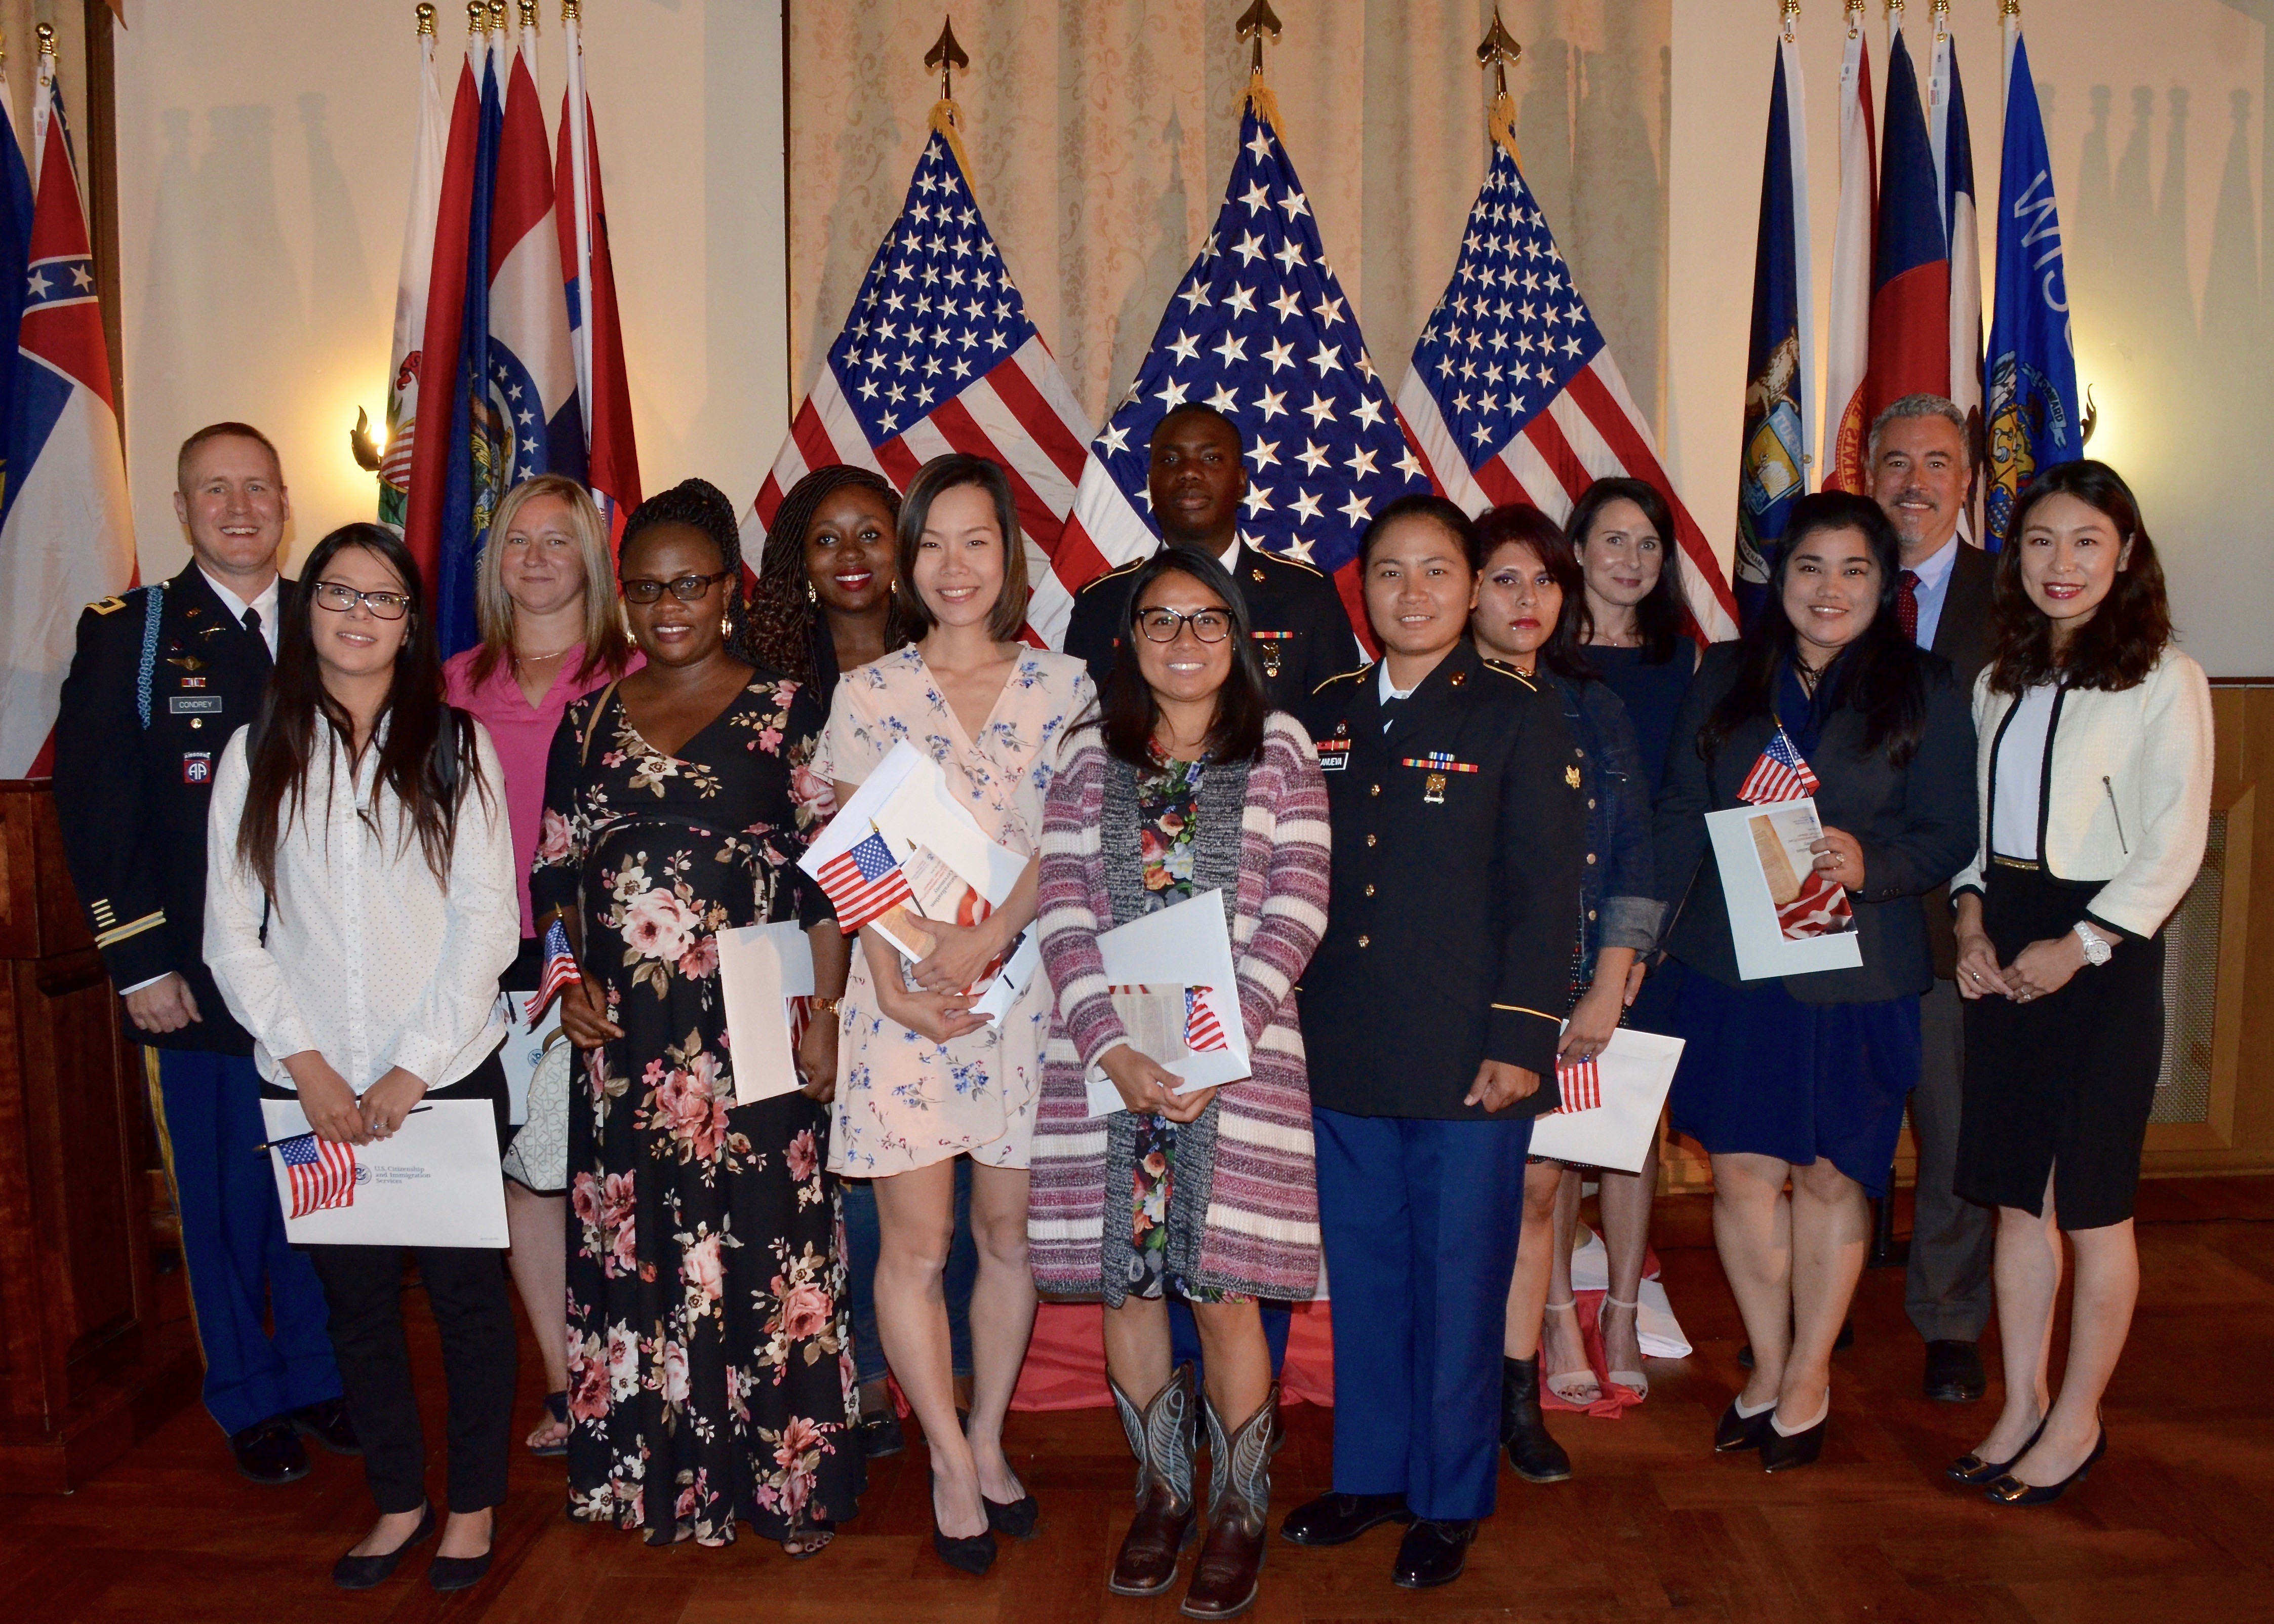 Naturalization Ceremony Locations And Schedule 2022 Texas Naturalization Ceremony In Stuttgart Celebrates 12 New Us Citizens |  Article | The United States Army